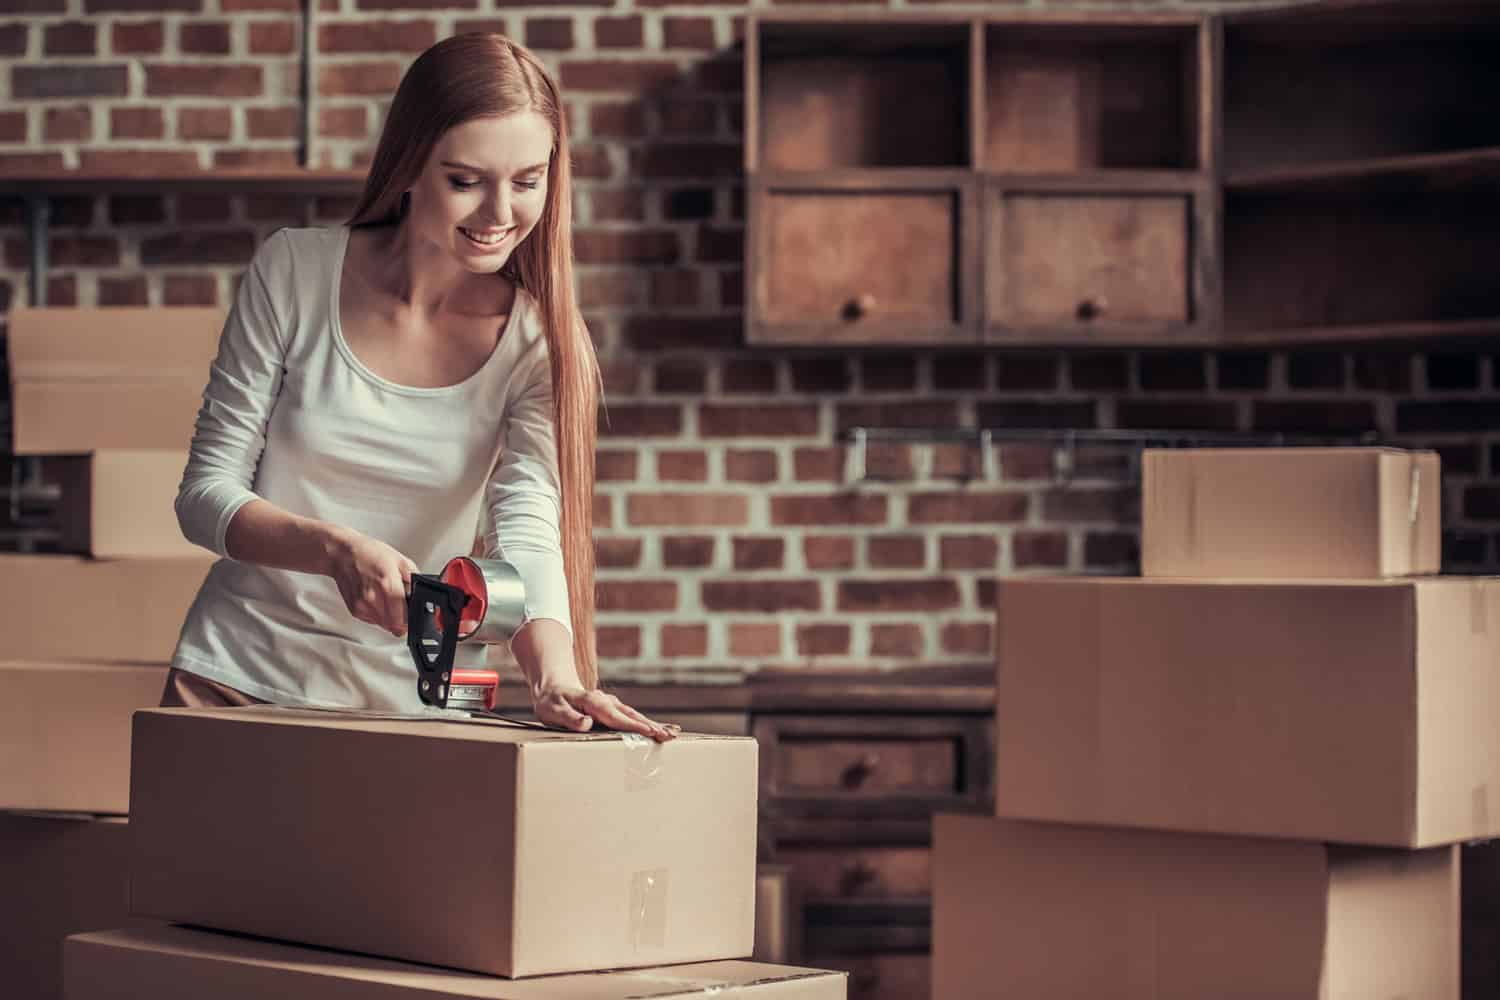 Beautiful young woman is packing cardboard boxes and smiling while moving into new apartment